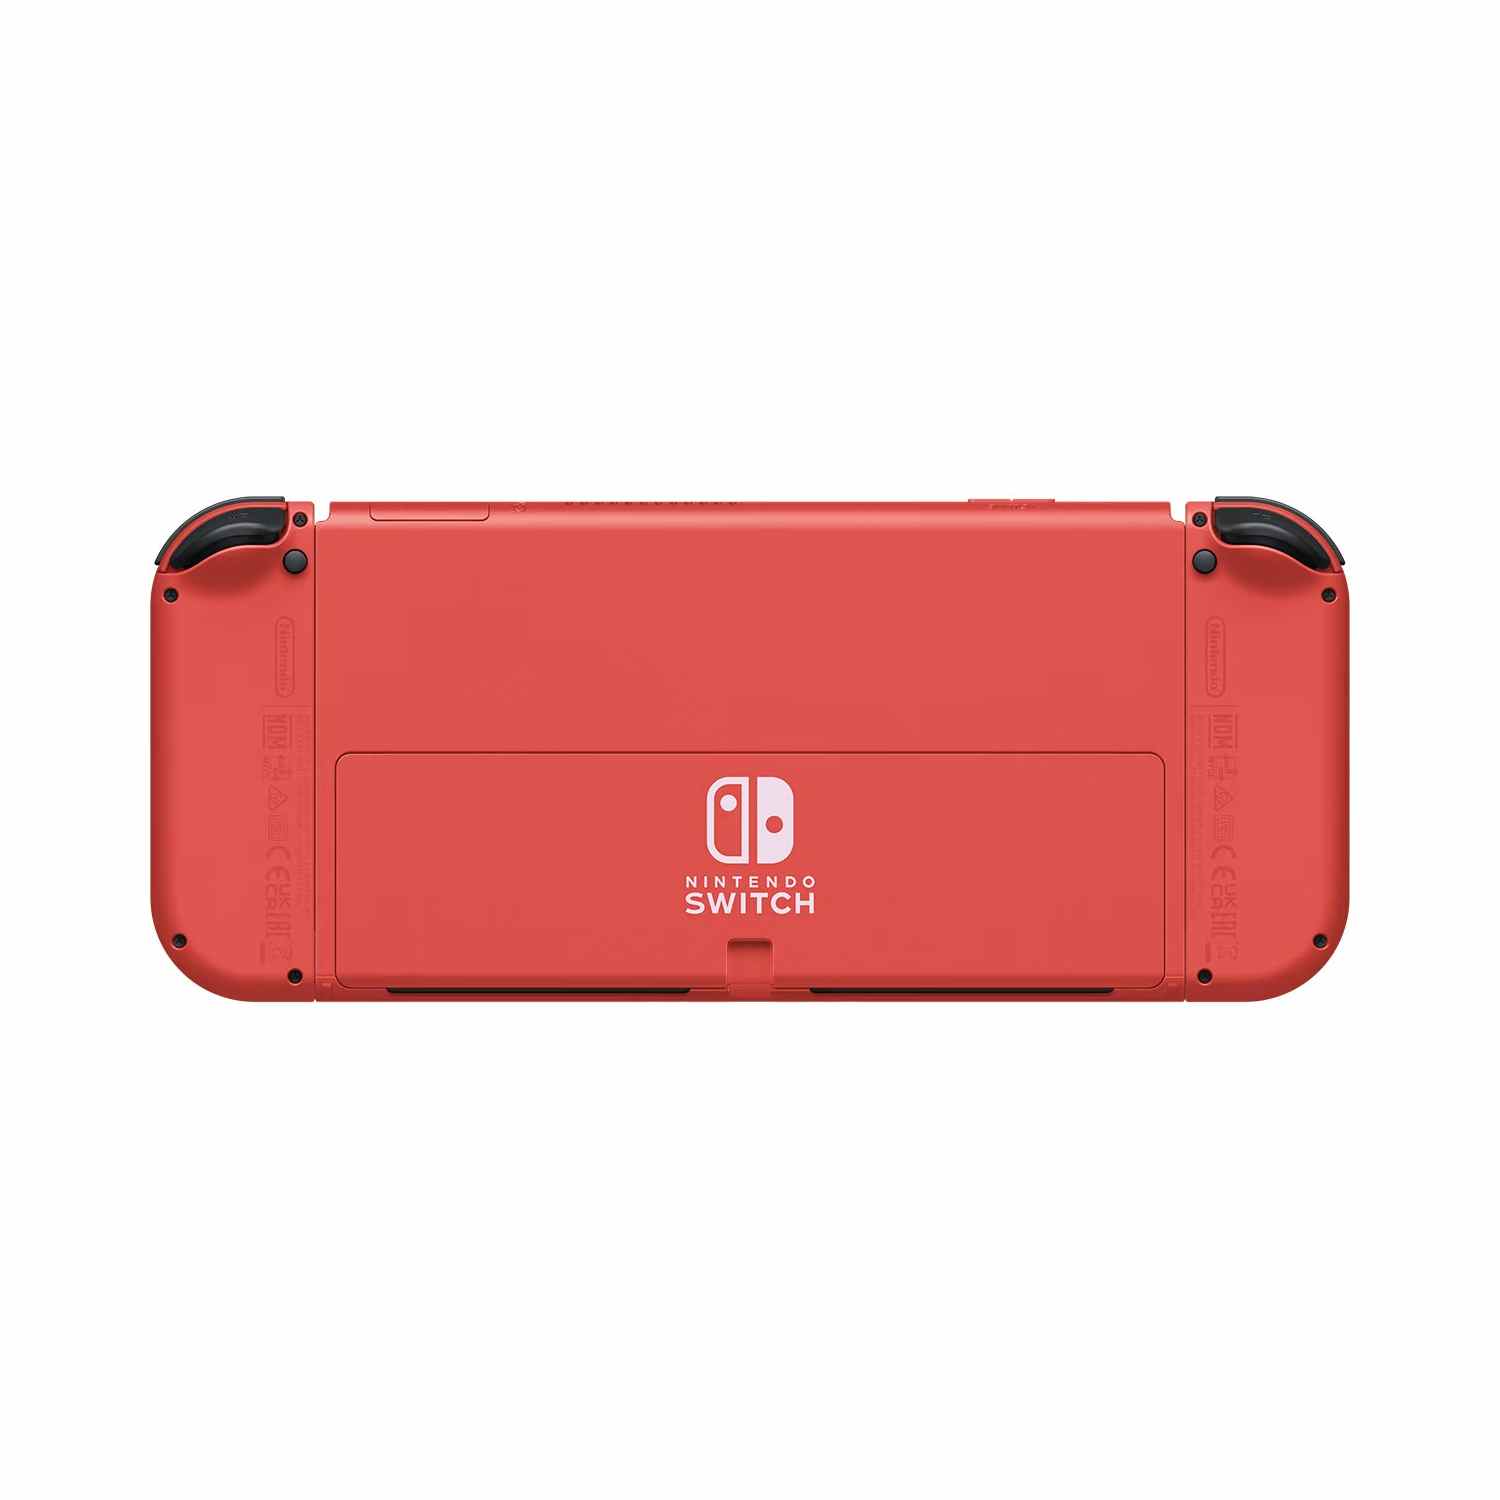 Nintendo Switch Console – Nintendo Switch™ - OLED Model - Mario Red Edition, , large image number 2